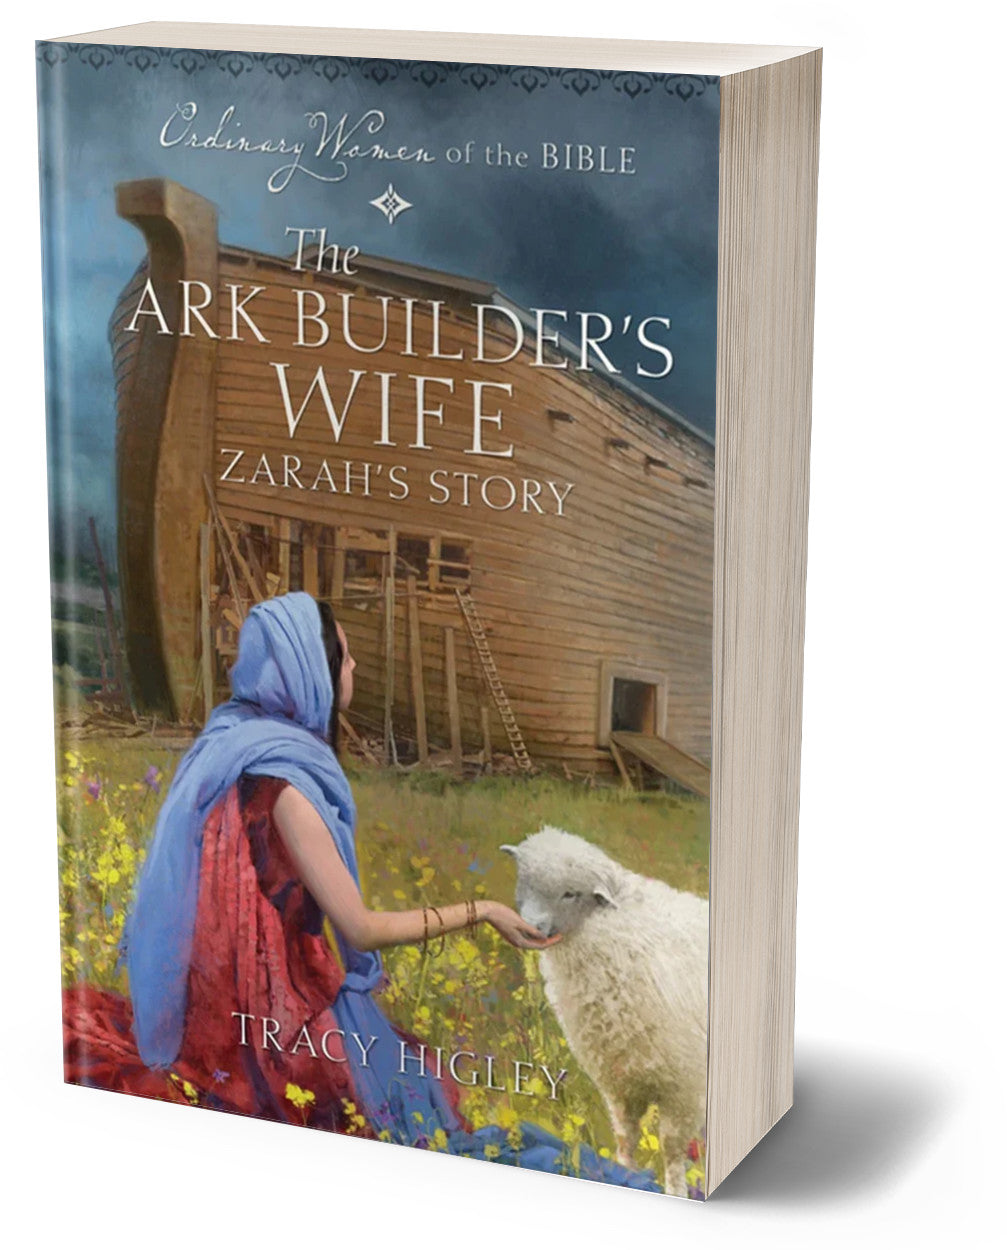 The Ark Builder's Wife (hardcover)